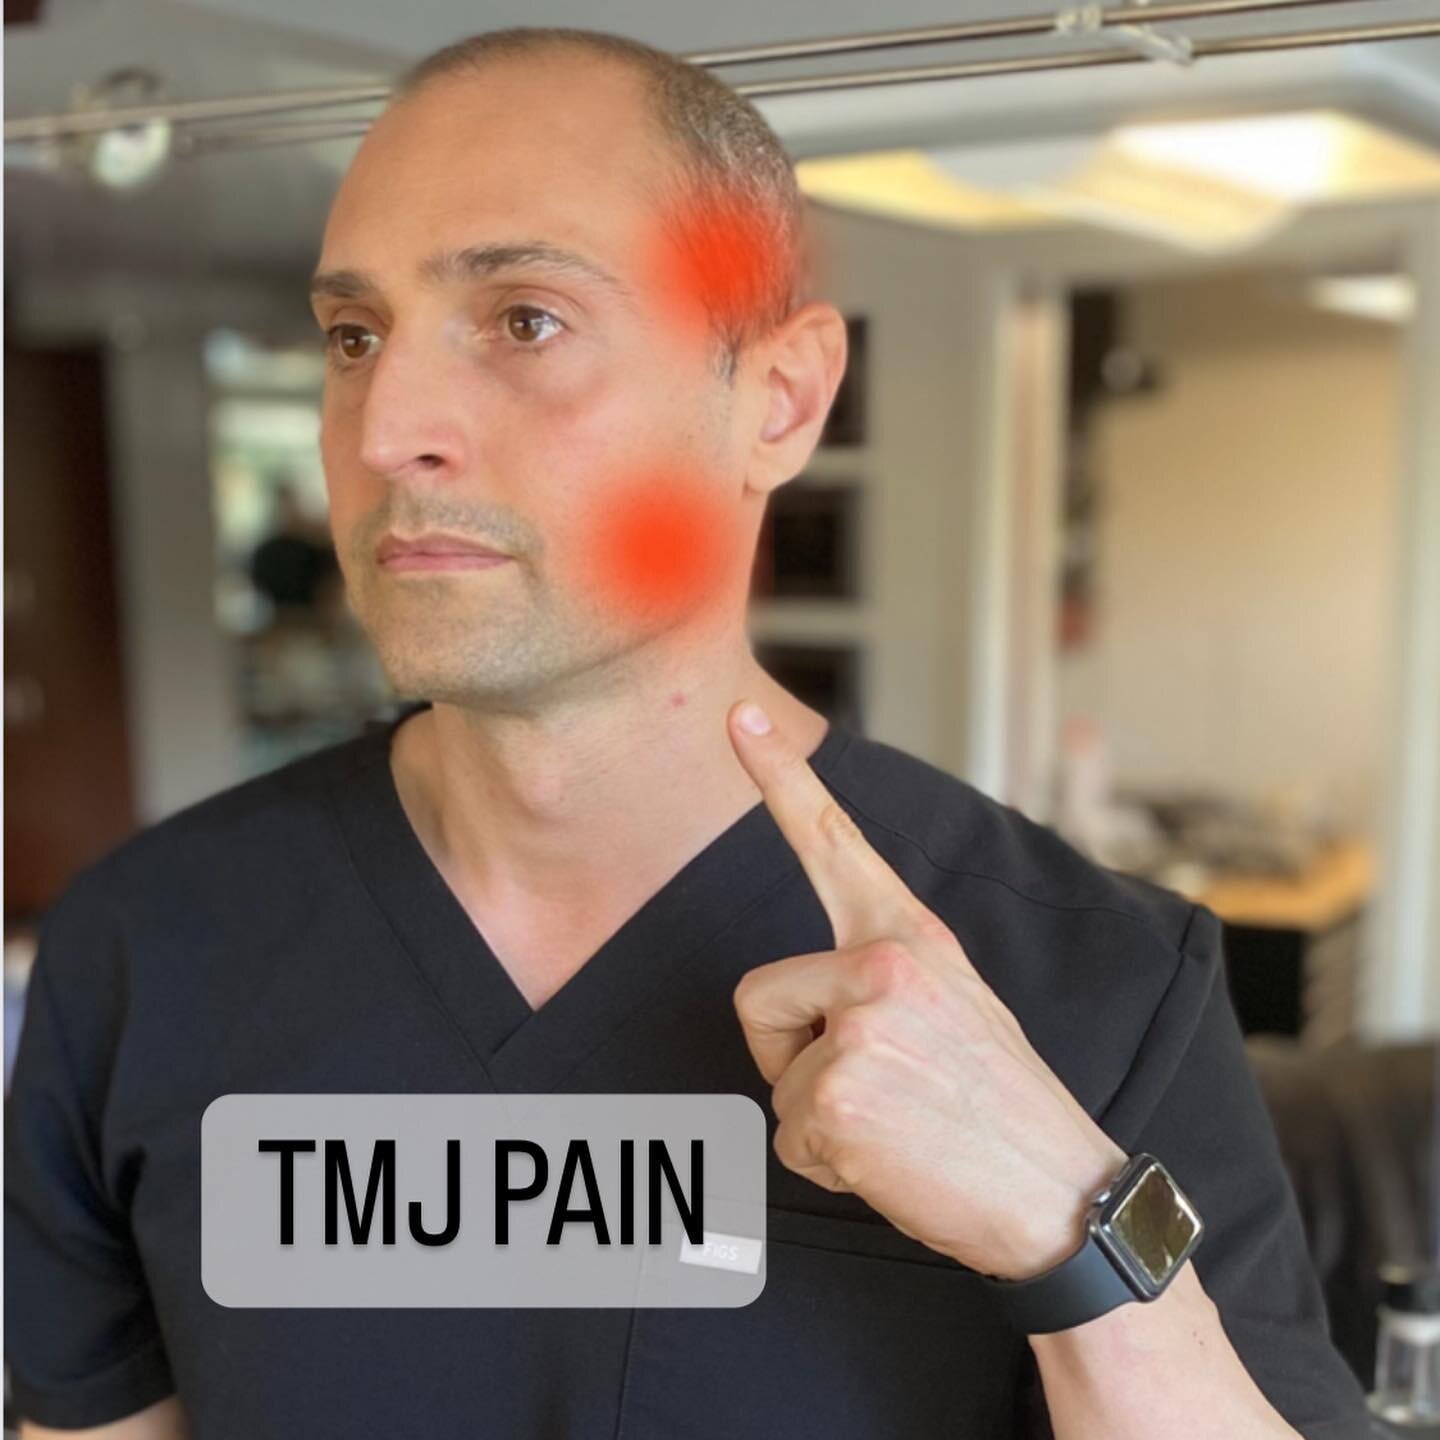 TMJ PAIN

TMJ pain can be a challenging a debilitating issue, and there are two treatments patients ask about most - Should I get a night guard or should I do Botox? 

Now keep in mind there can be many contributing factors, and if you suffer with th